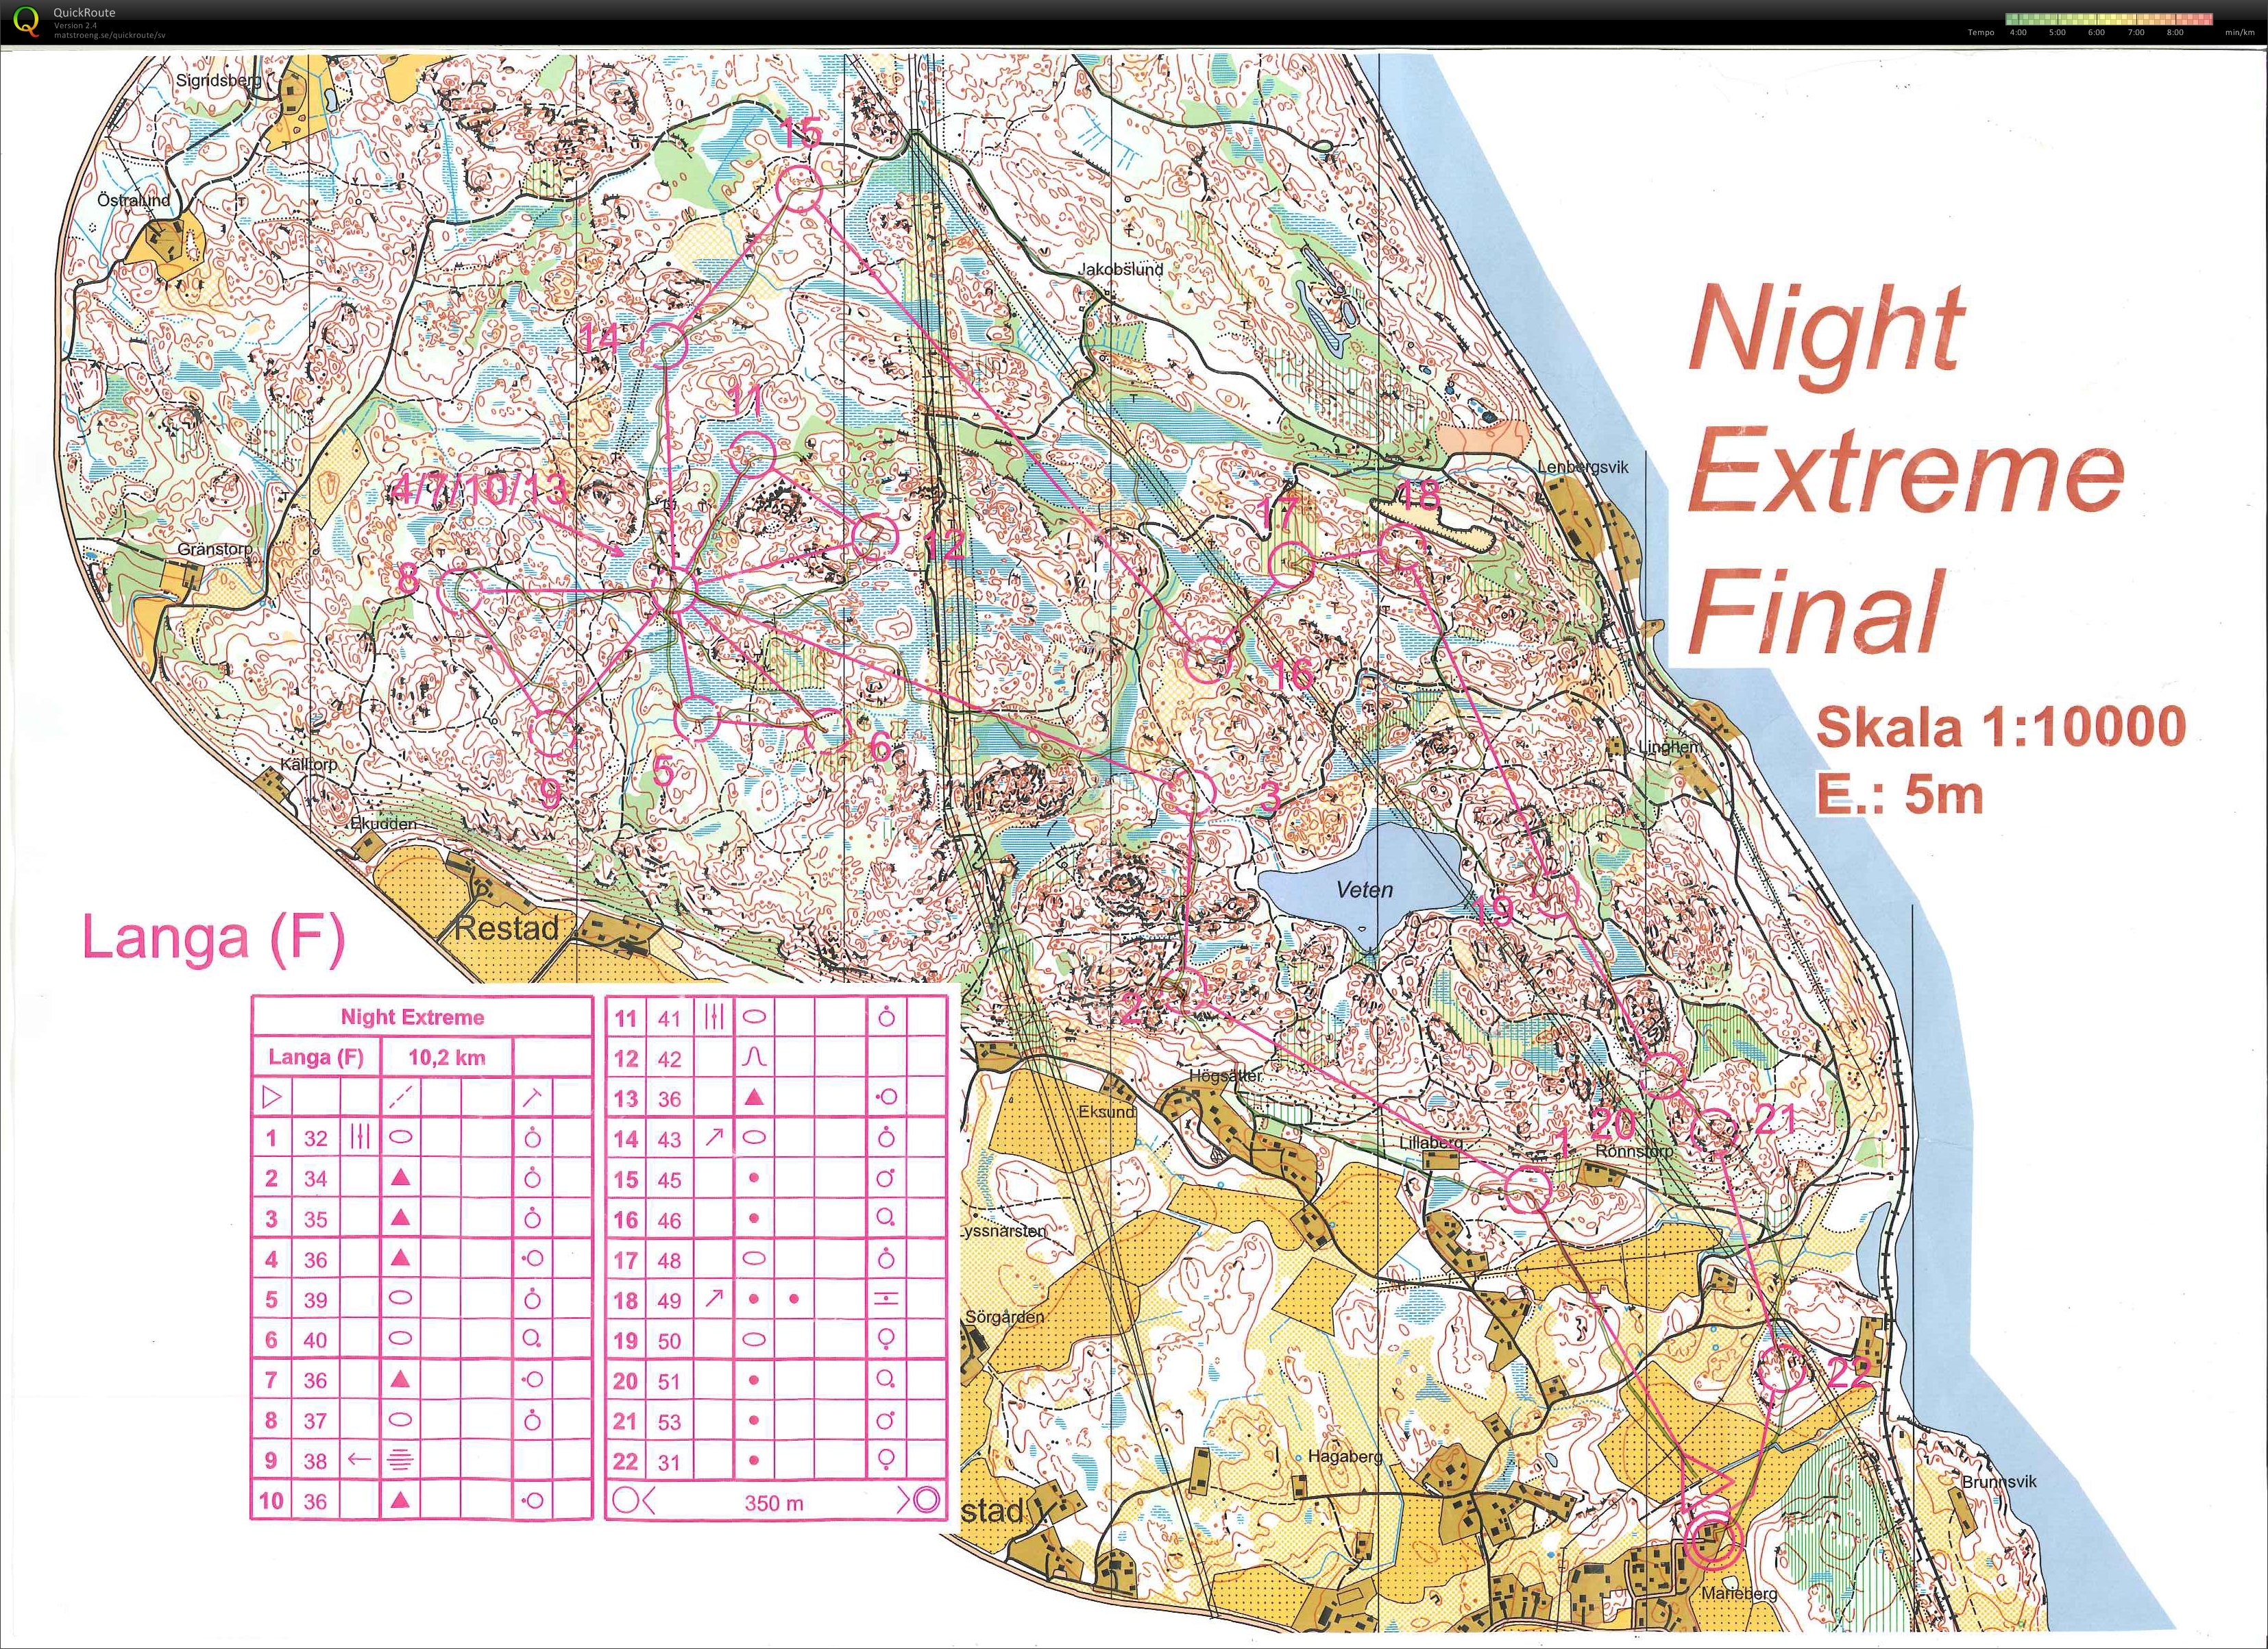 Night Extreme Final (13.03.2012)